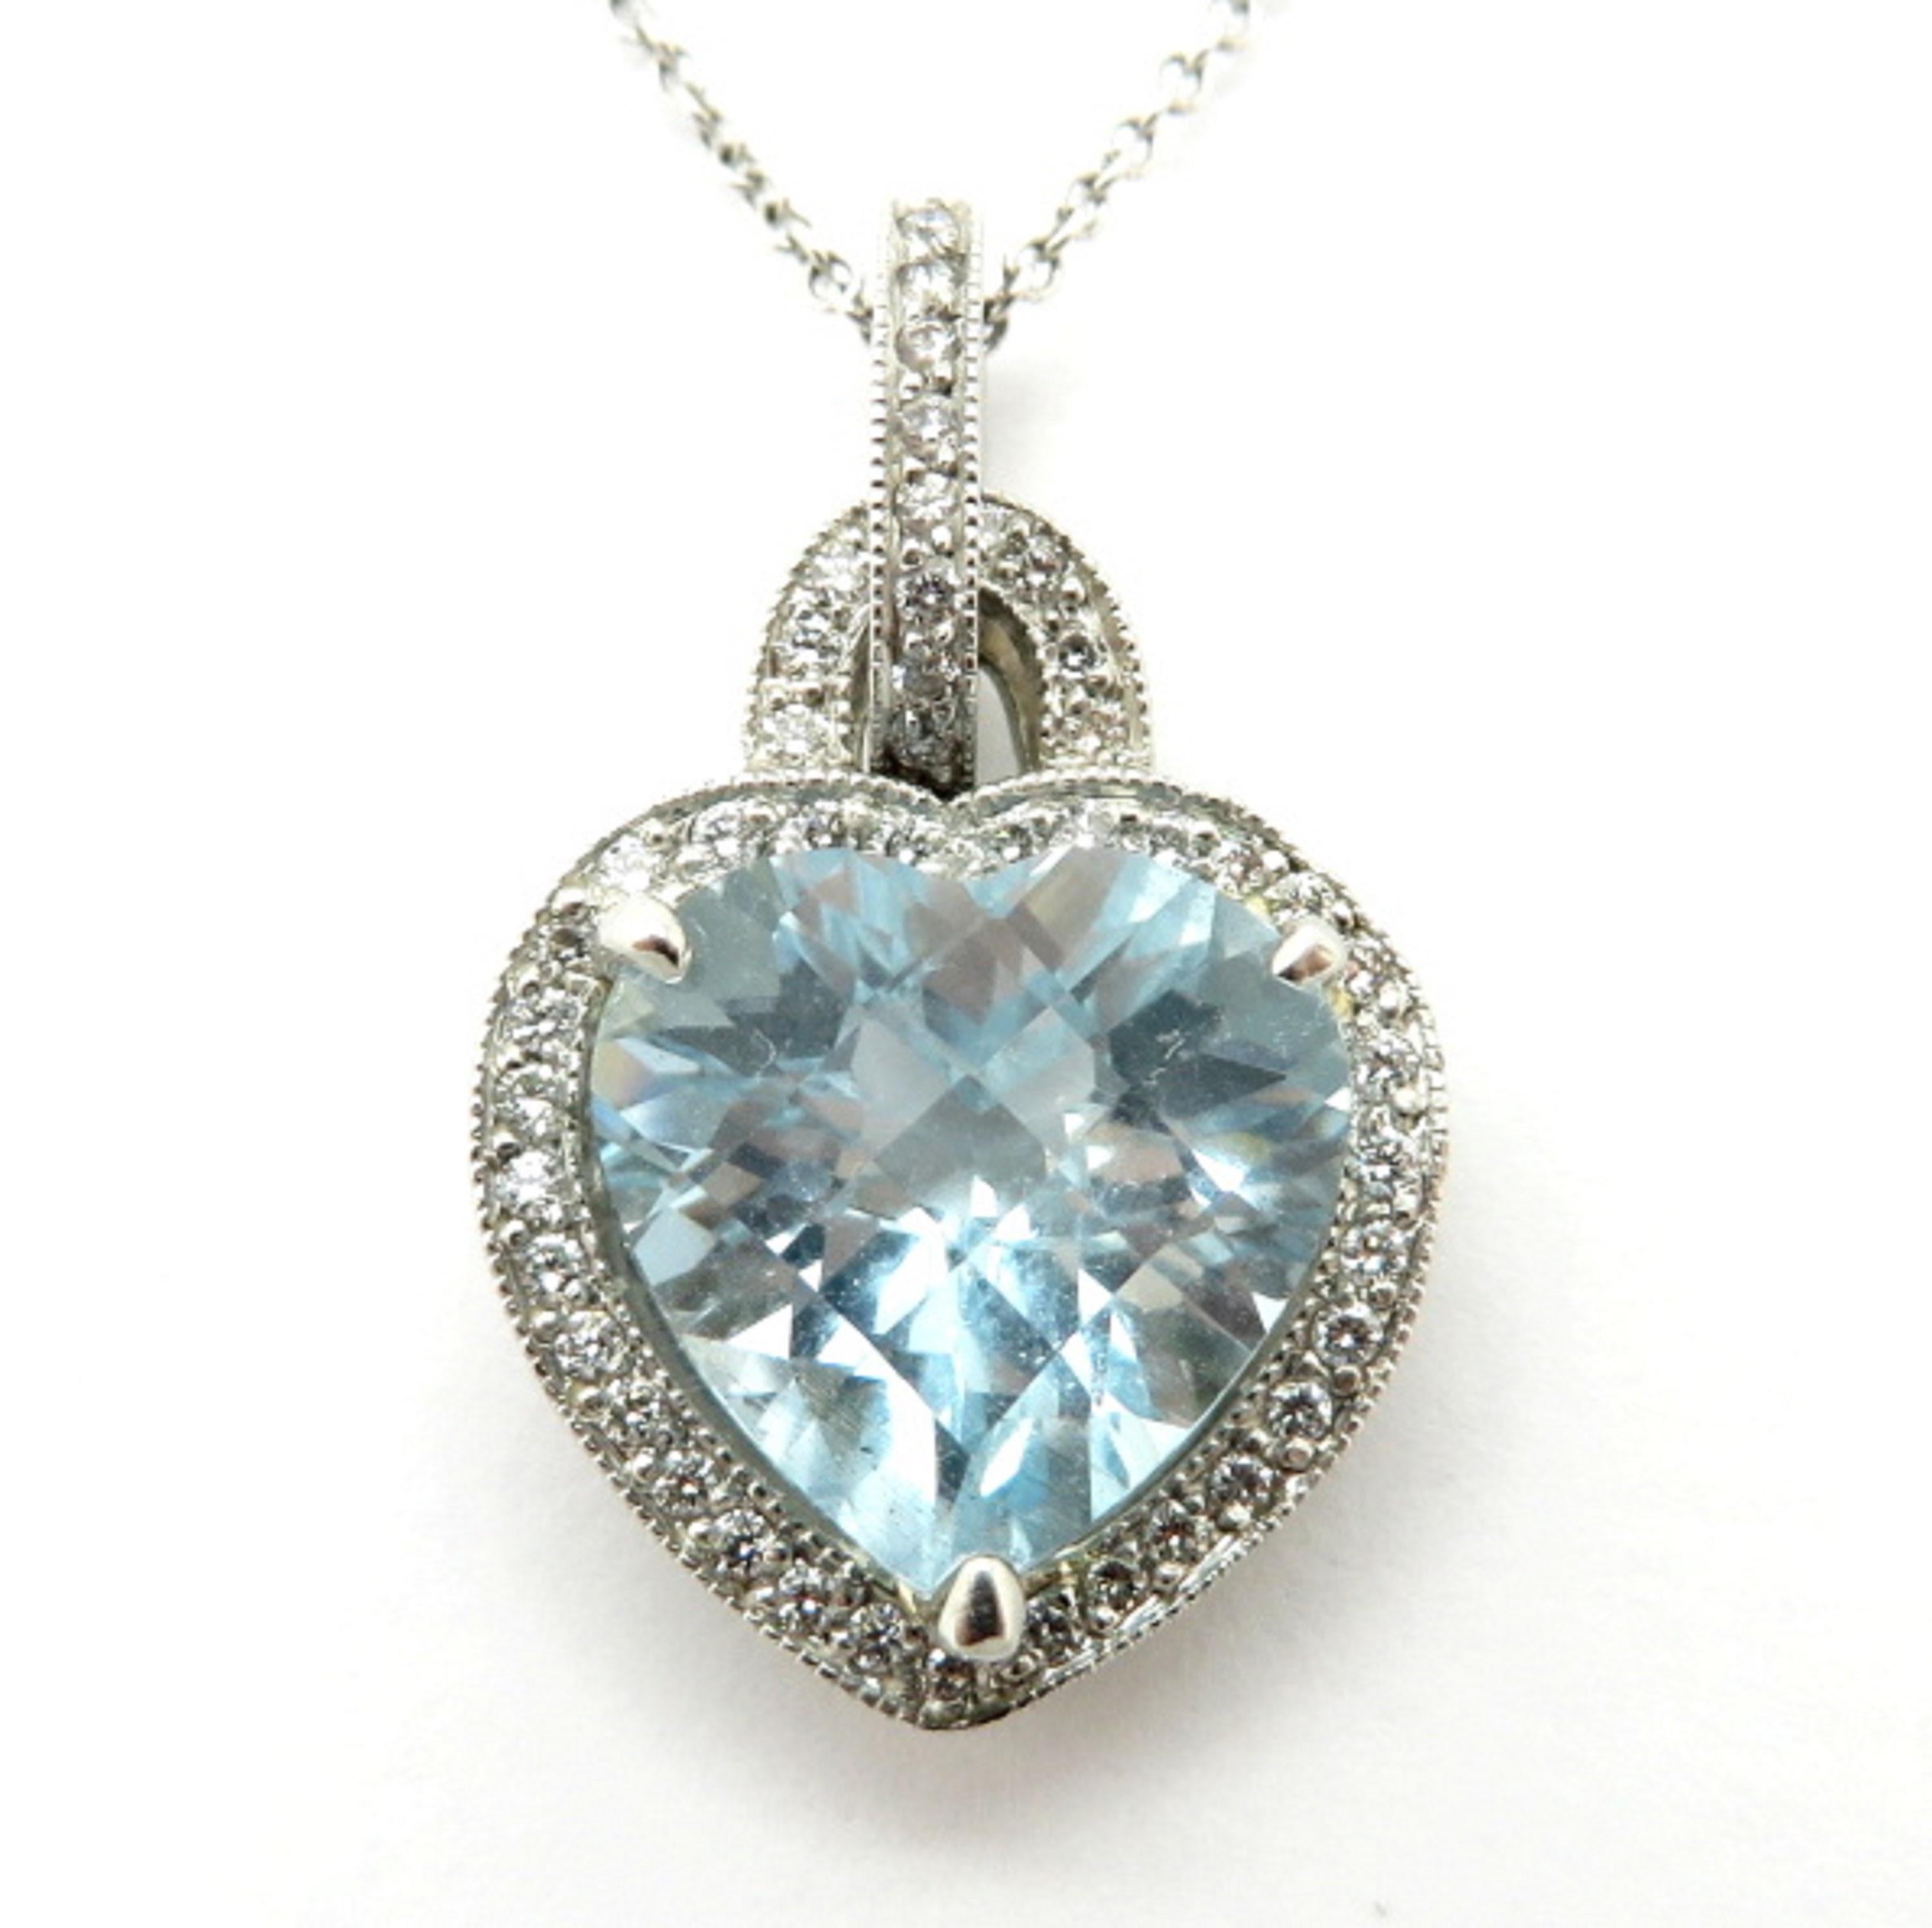 Estate 18K white gold aquamarine and diamond heart pendant necklace. Showcasing one heart shaped checkerboard faceted aquamarine gemstone weighing approximately 3.32 carats. Interspersed through the pendant are 86 round brilliant cut diamonds